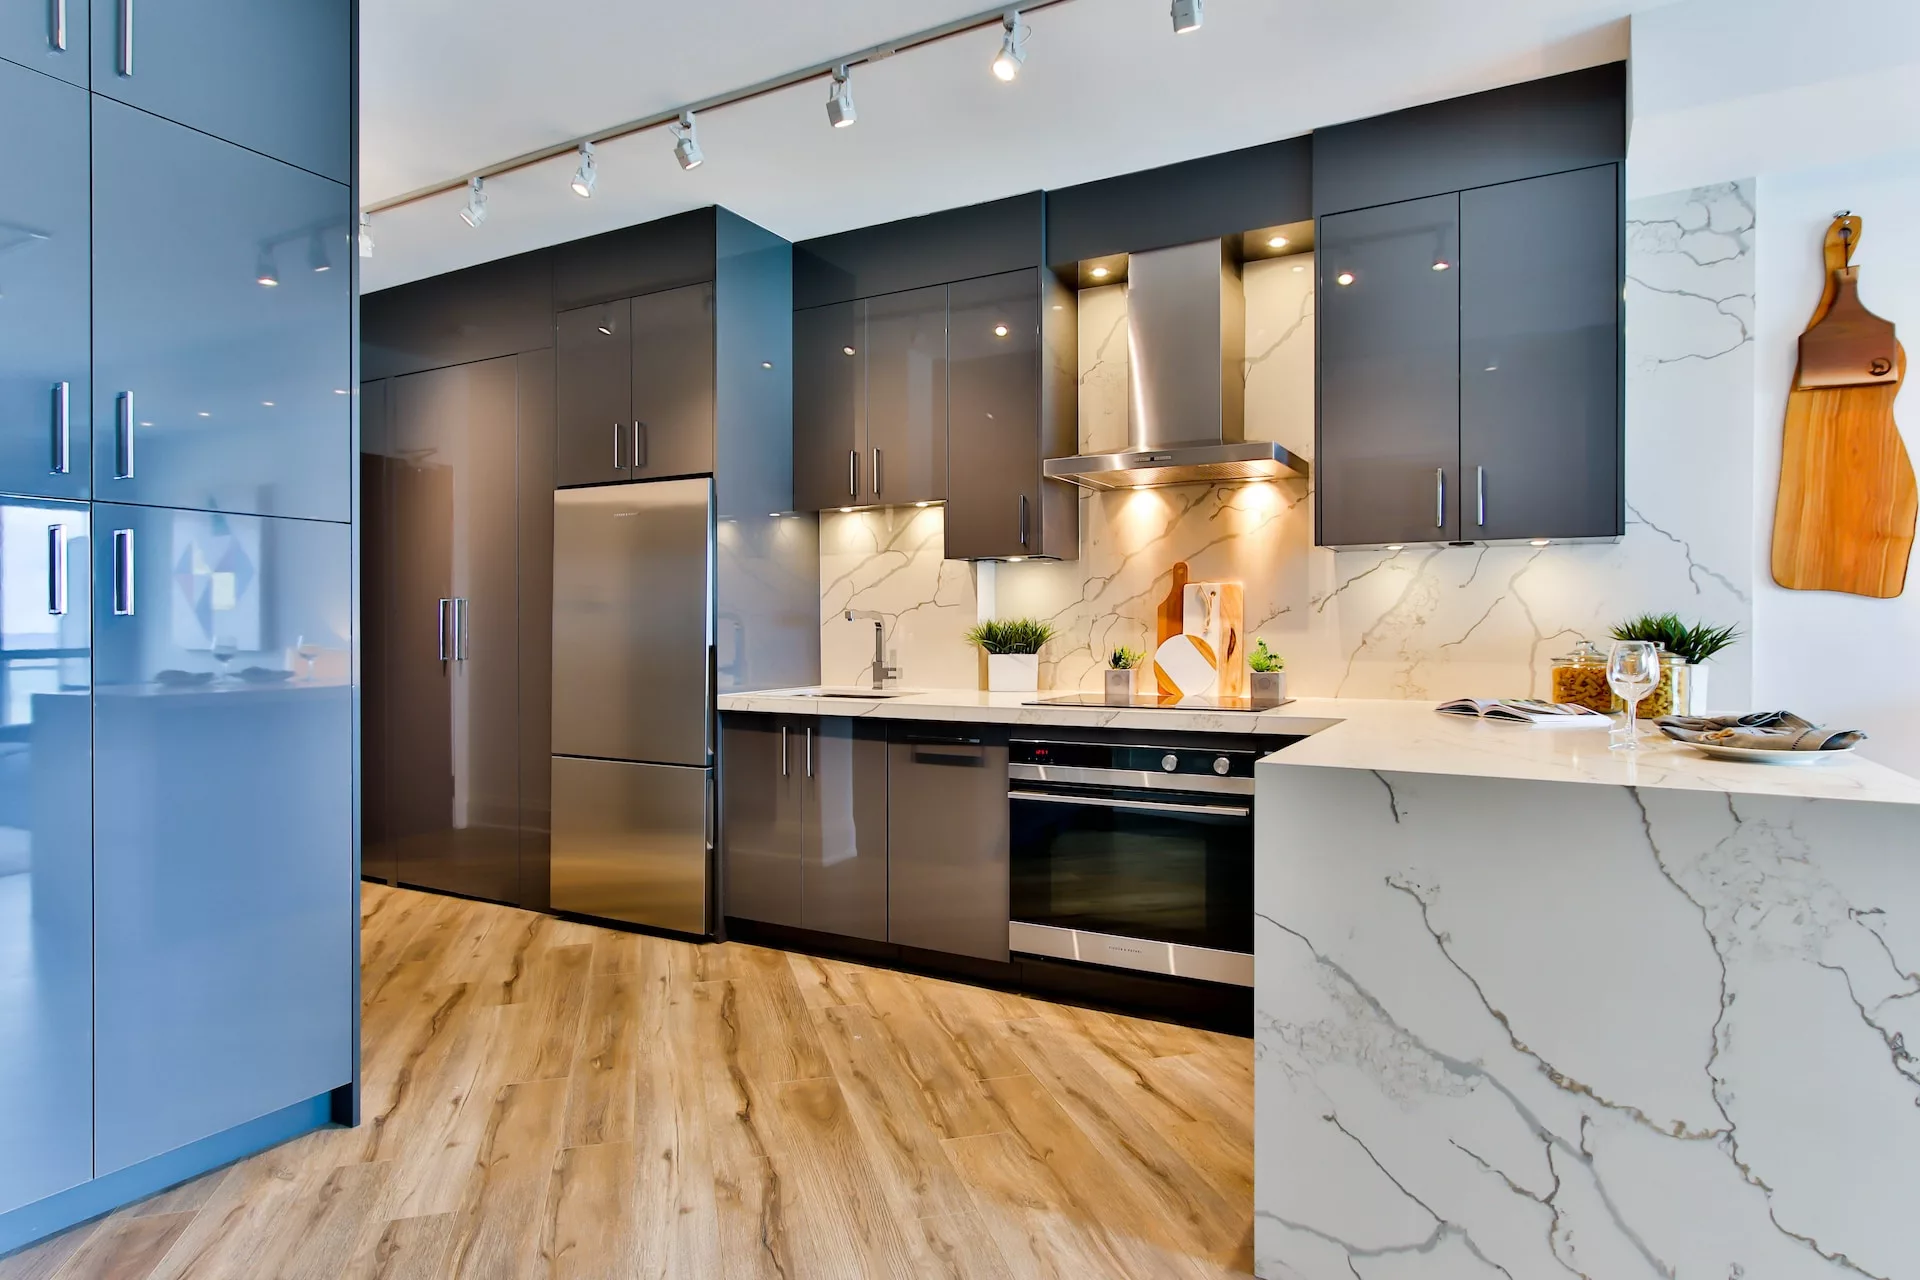 Essential Kitchen Features to Look for When Renting an Apartment